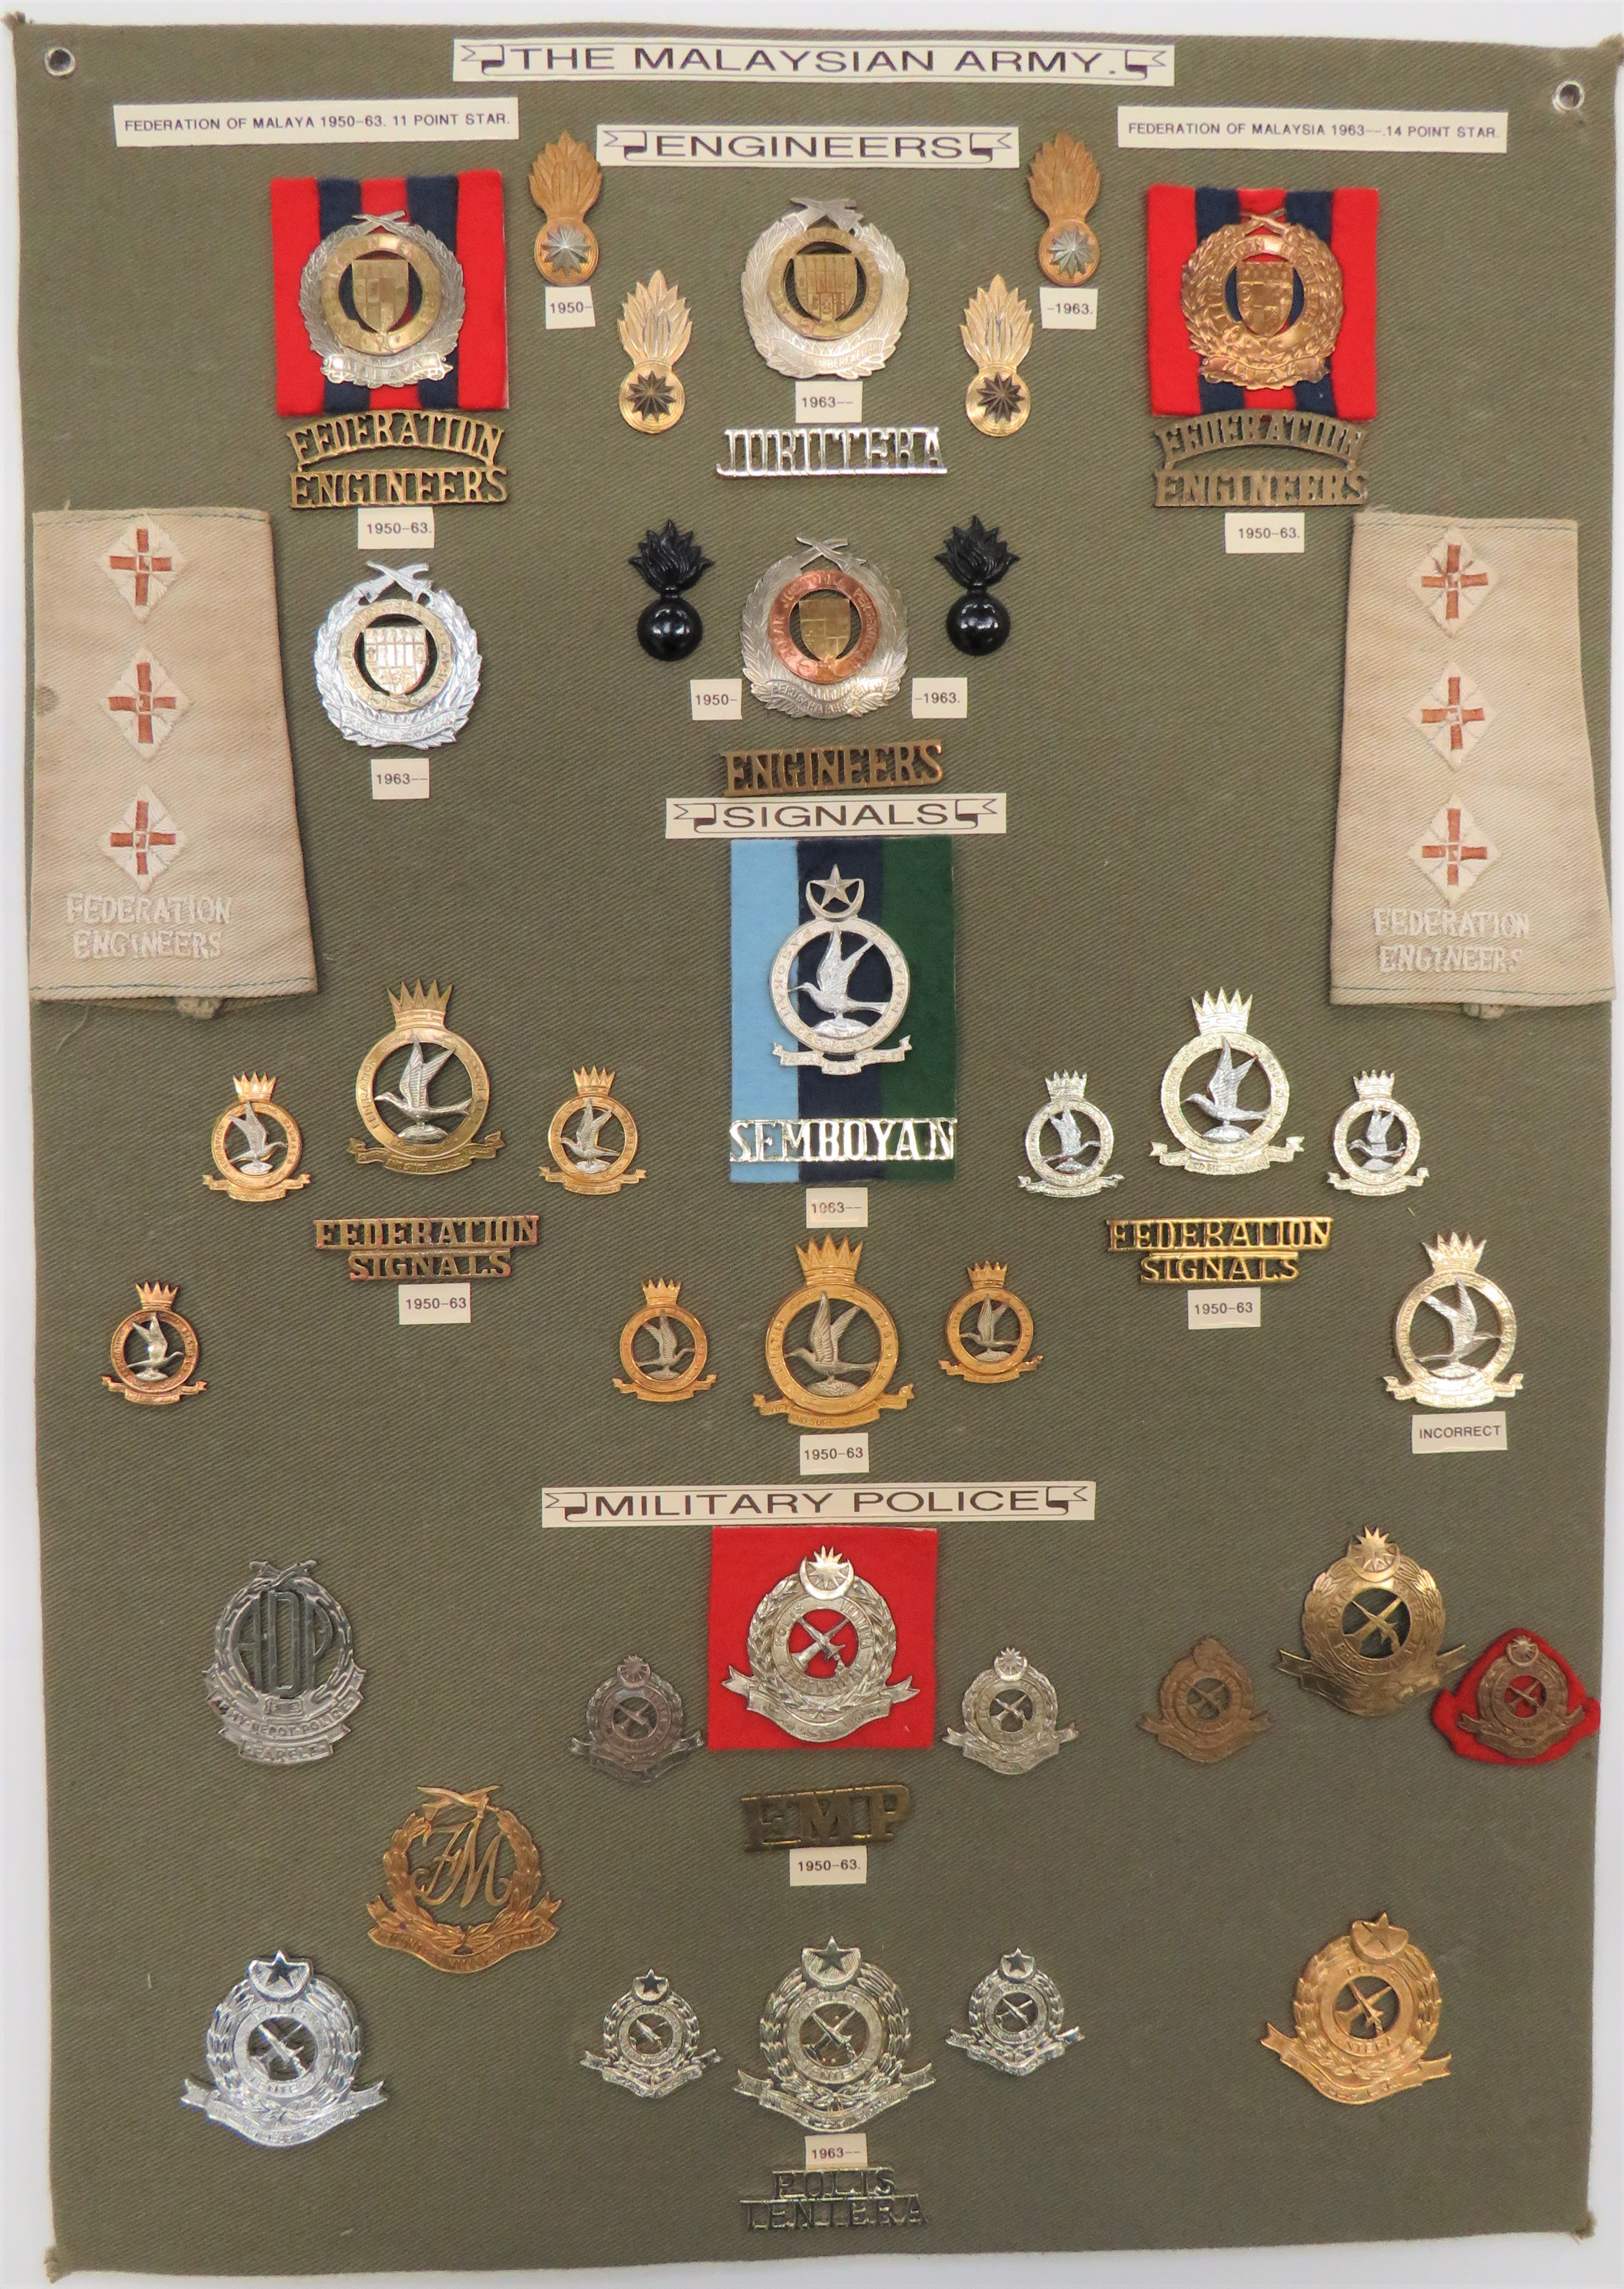 Malaysian Army - 46 Items Of Insignia display board with good tabulated display of metal badges